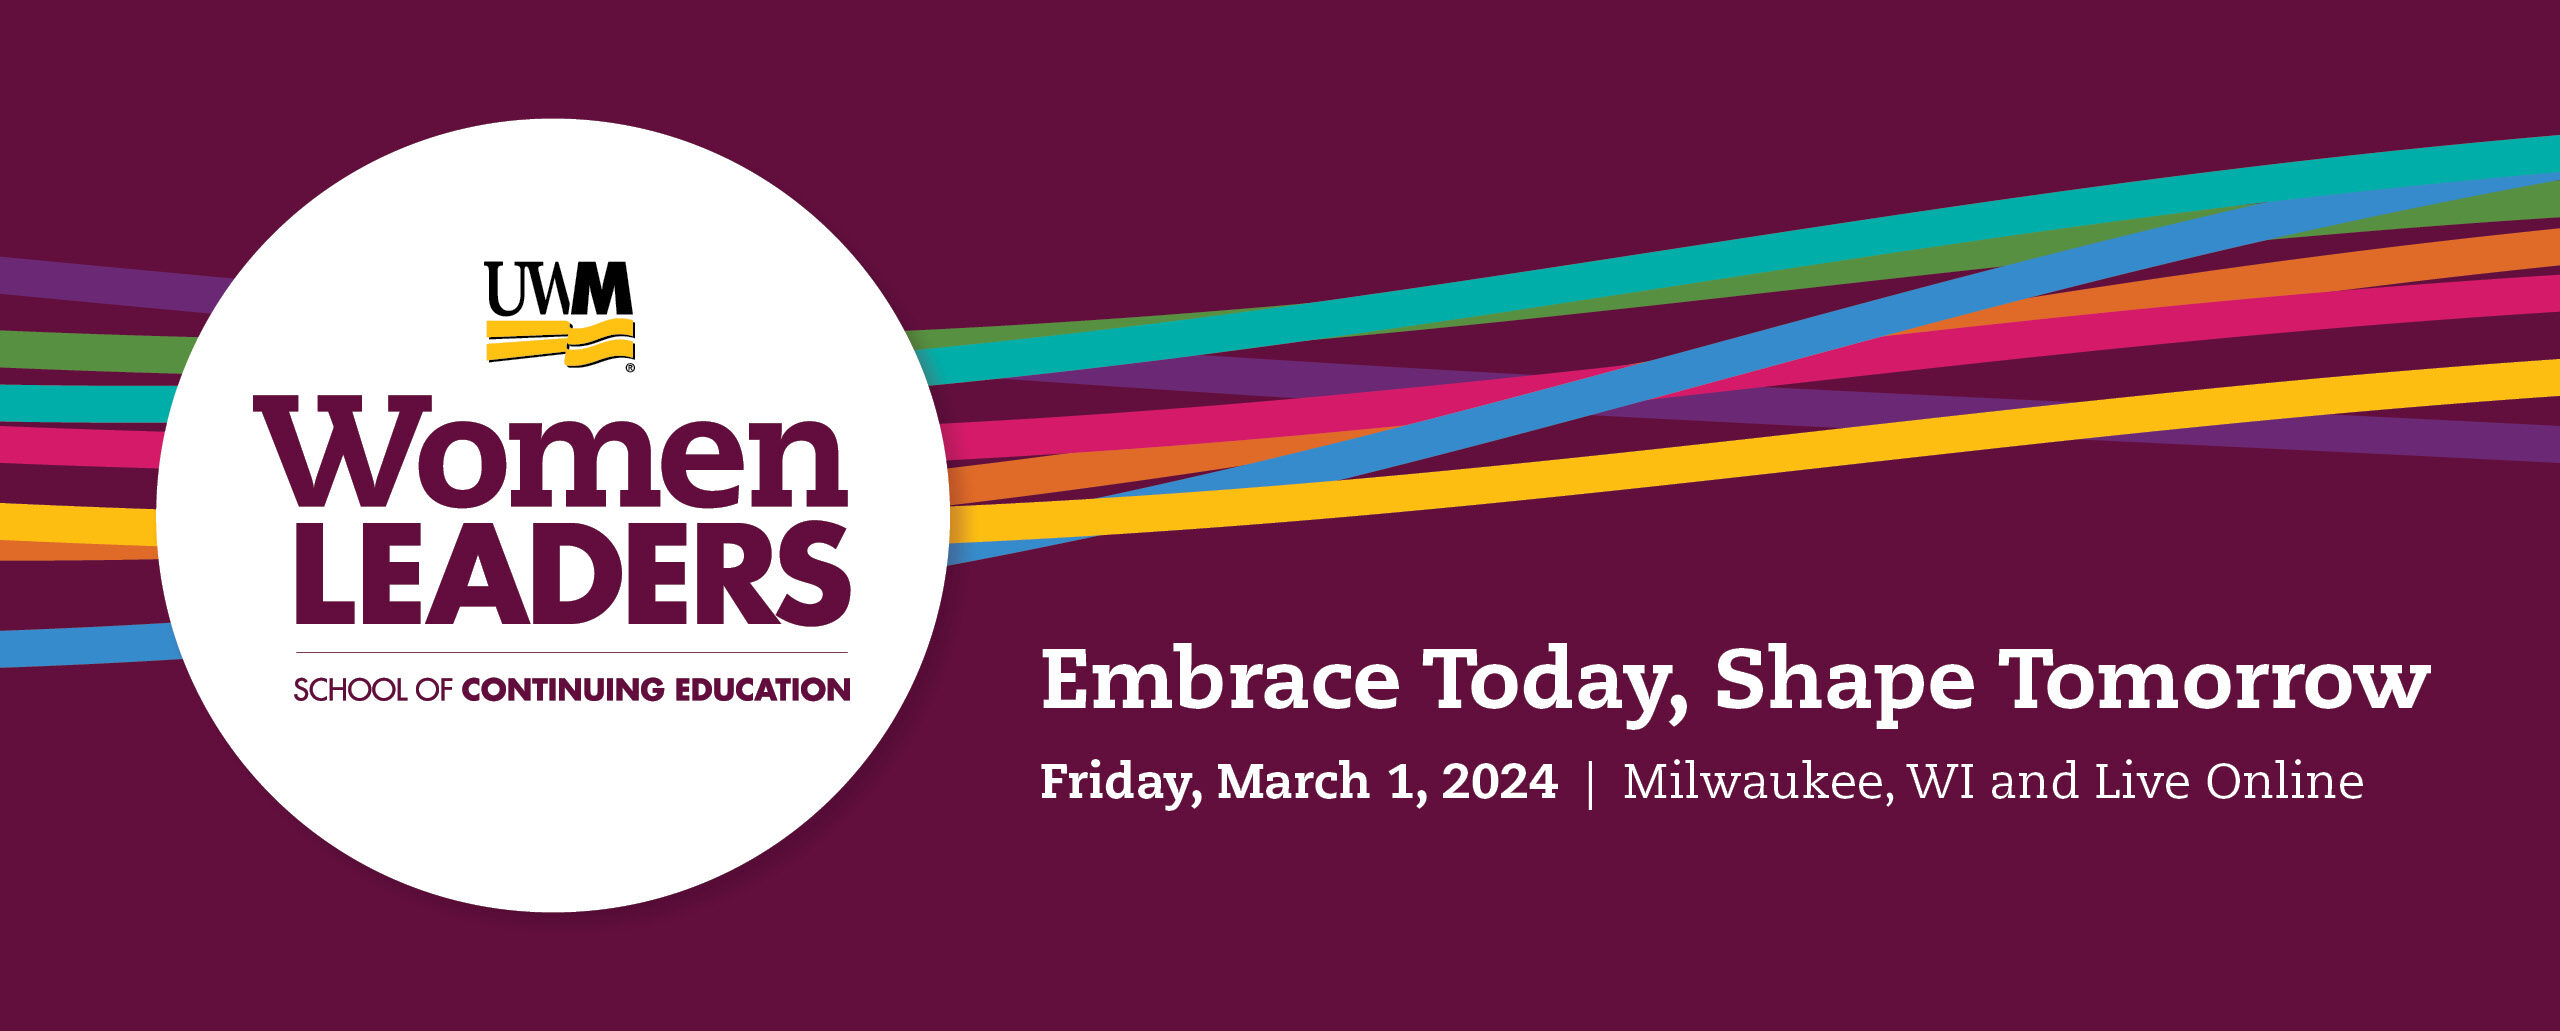 Women Leaders Conference | March 1, 2024 | Milwaukee, WI and Live Online